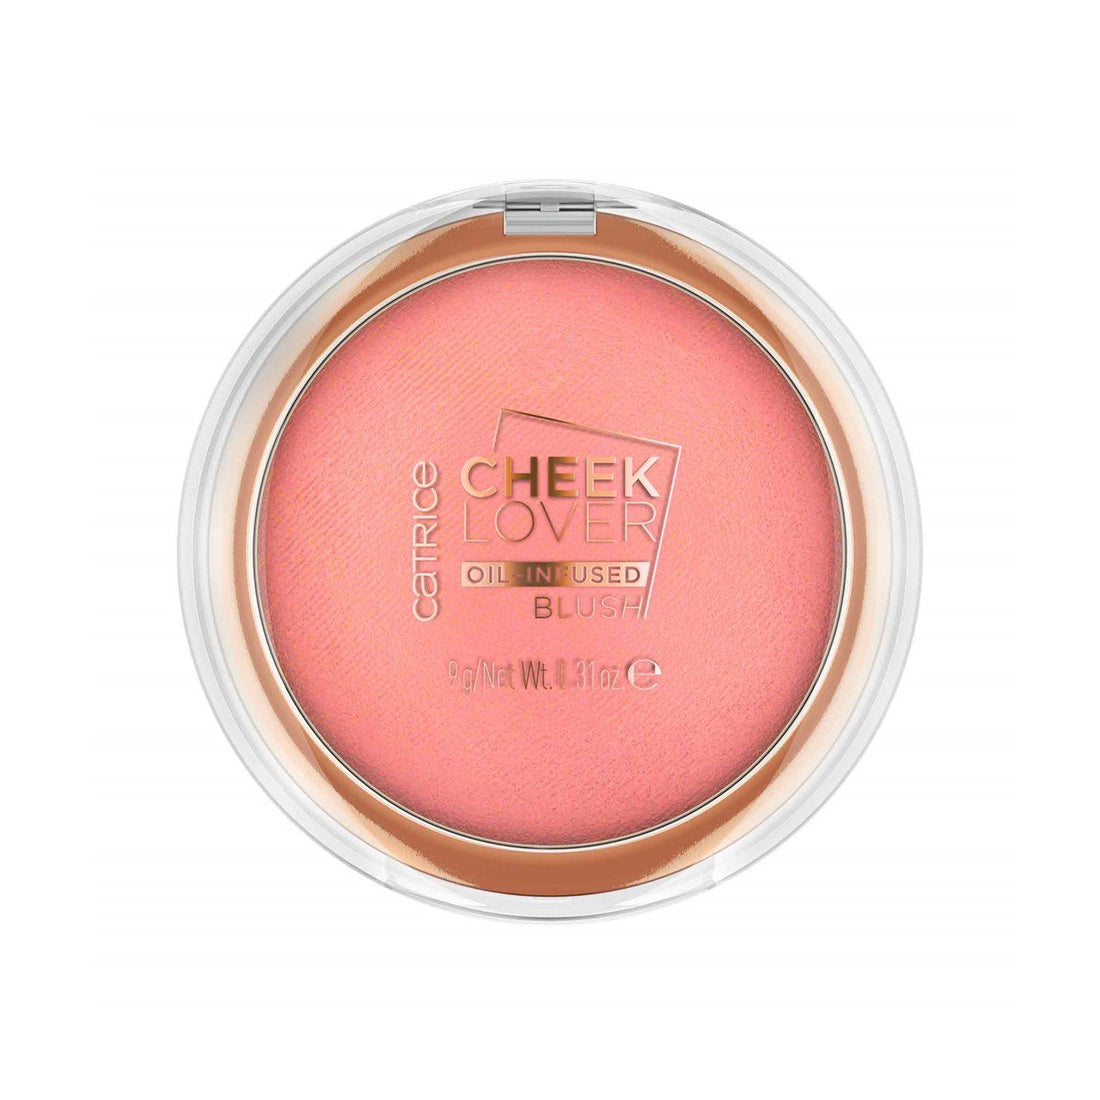 Catrice AirBlush Glow – 030 Love oz) Rosy (0.19 5.5g Cosmetyque